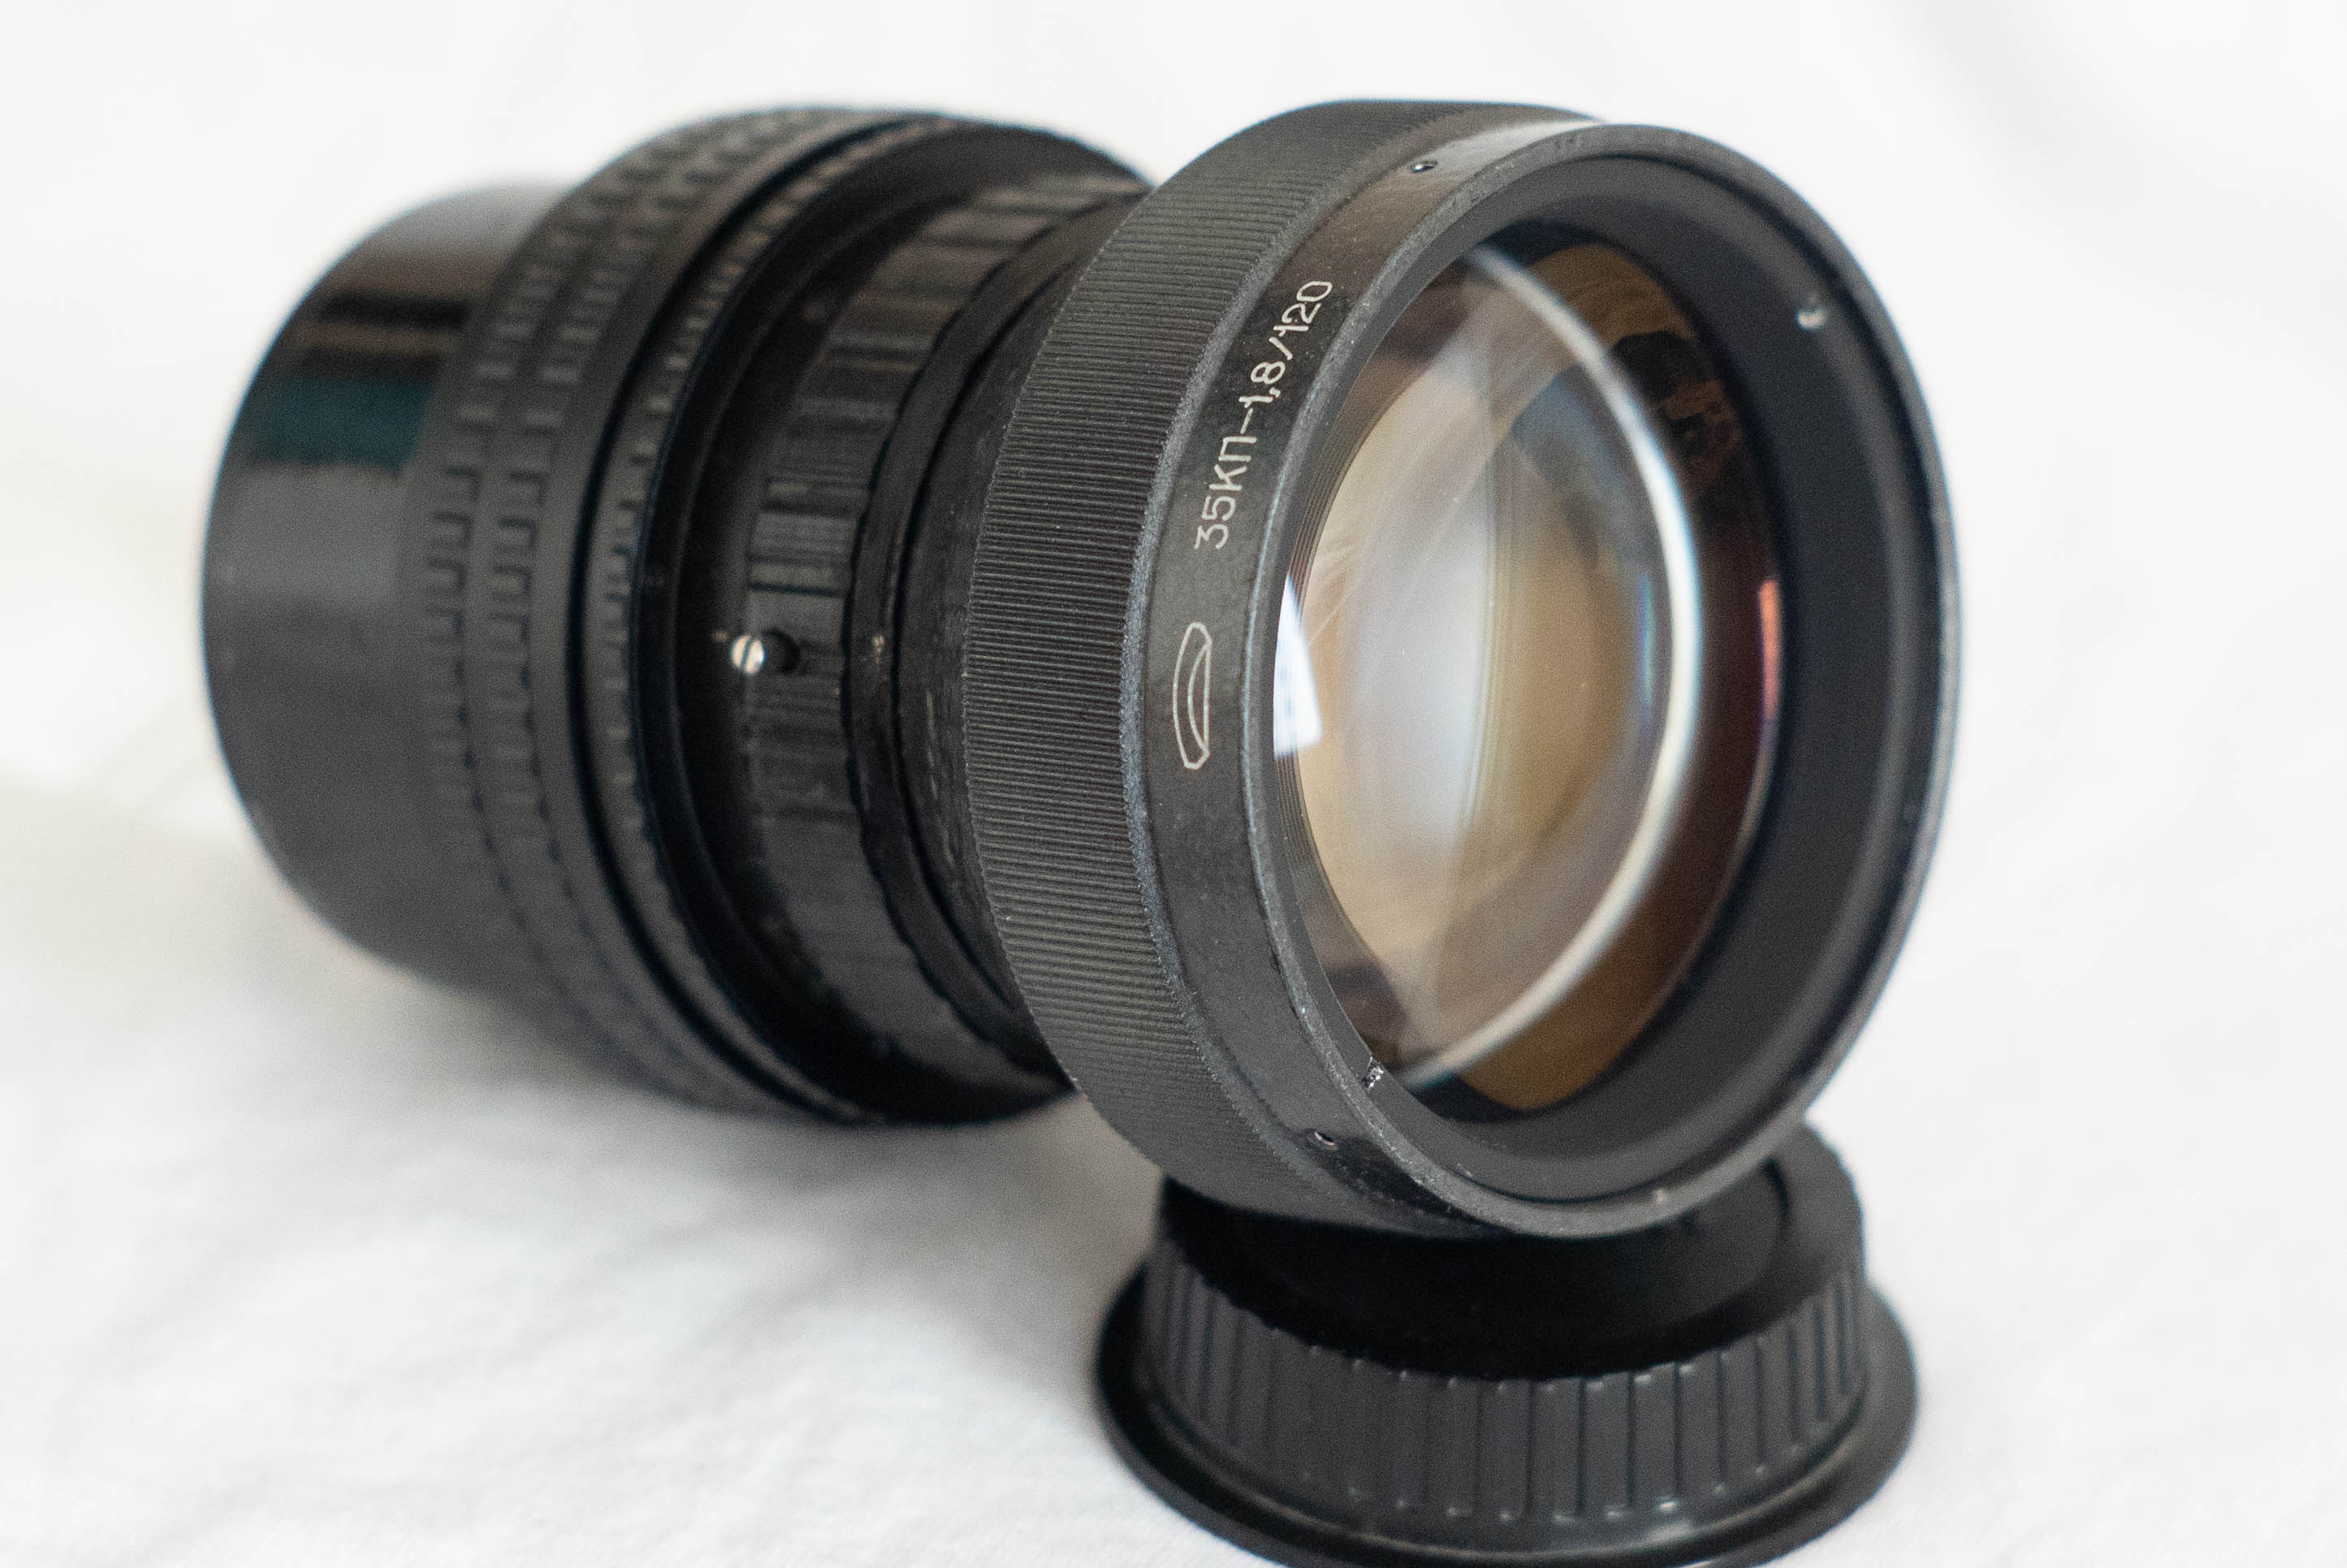 Photo of the adapted lens.